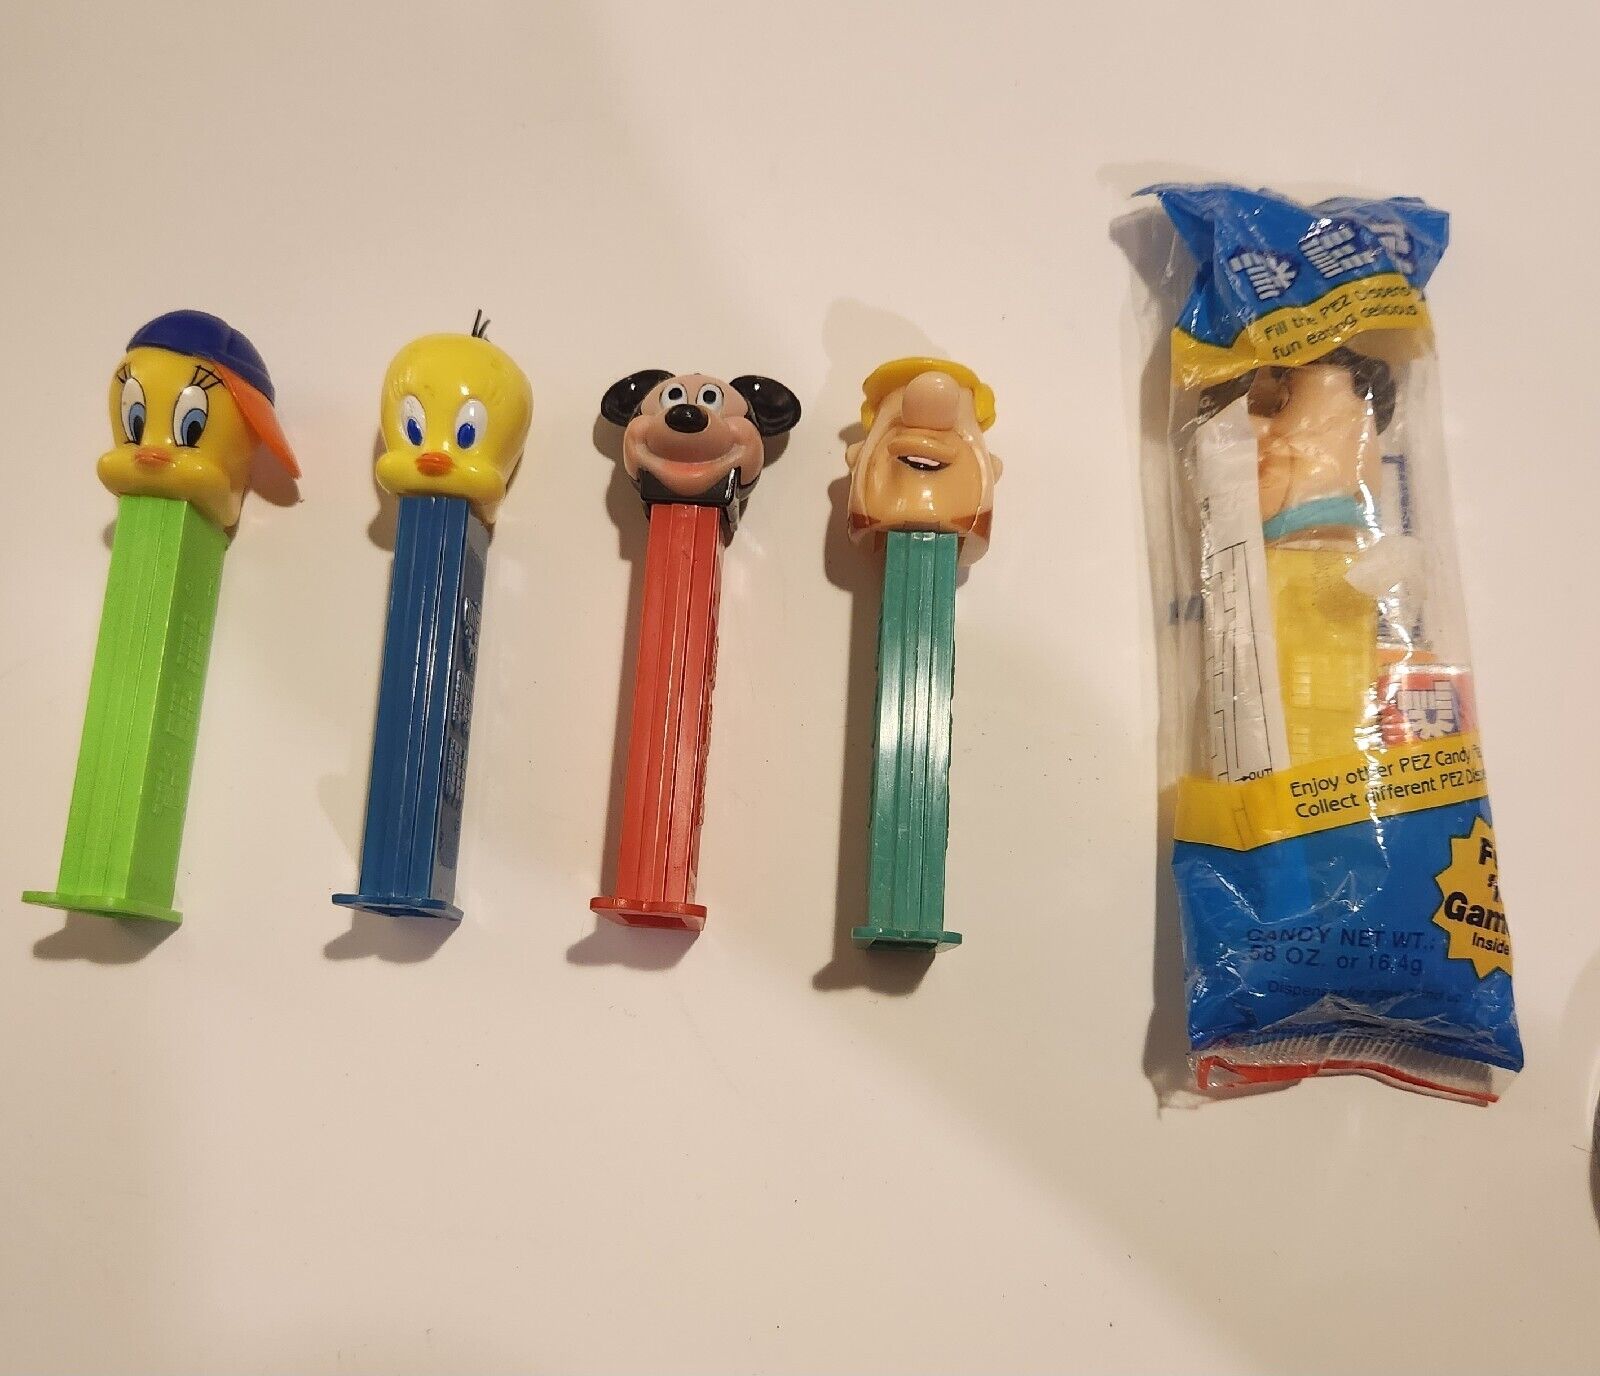 Vintage Pezz Dispensers 2 Tweety, 1 Micky Mouse, 1 Barney Rubble And 1 Fred...